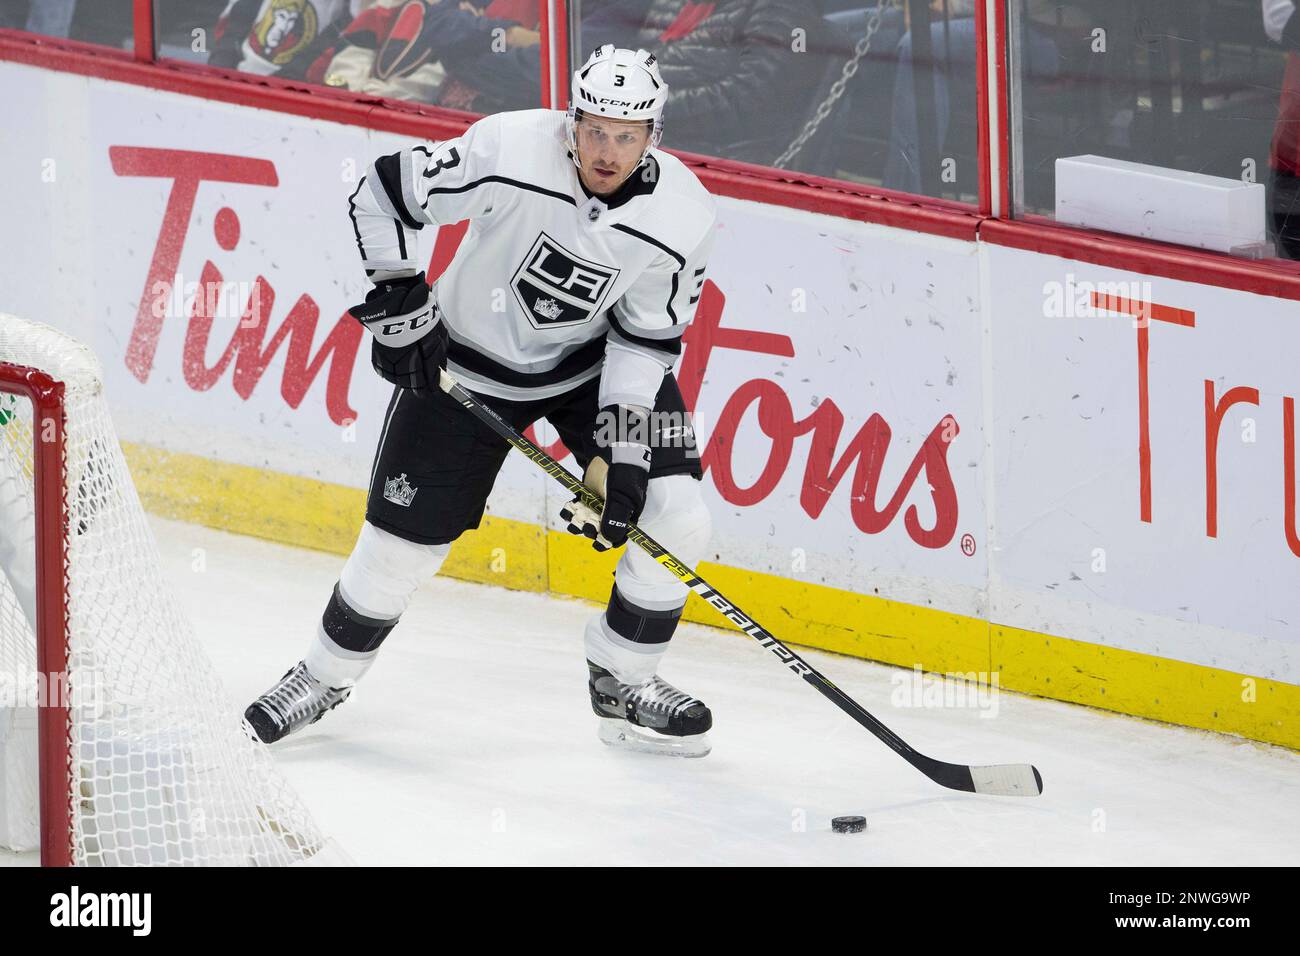 The Los Angeles Kings no longer have to pay Dion Phaneuf